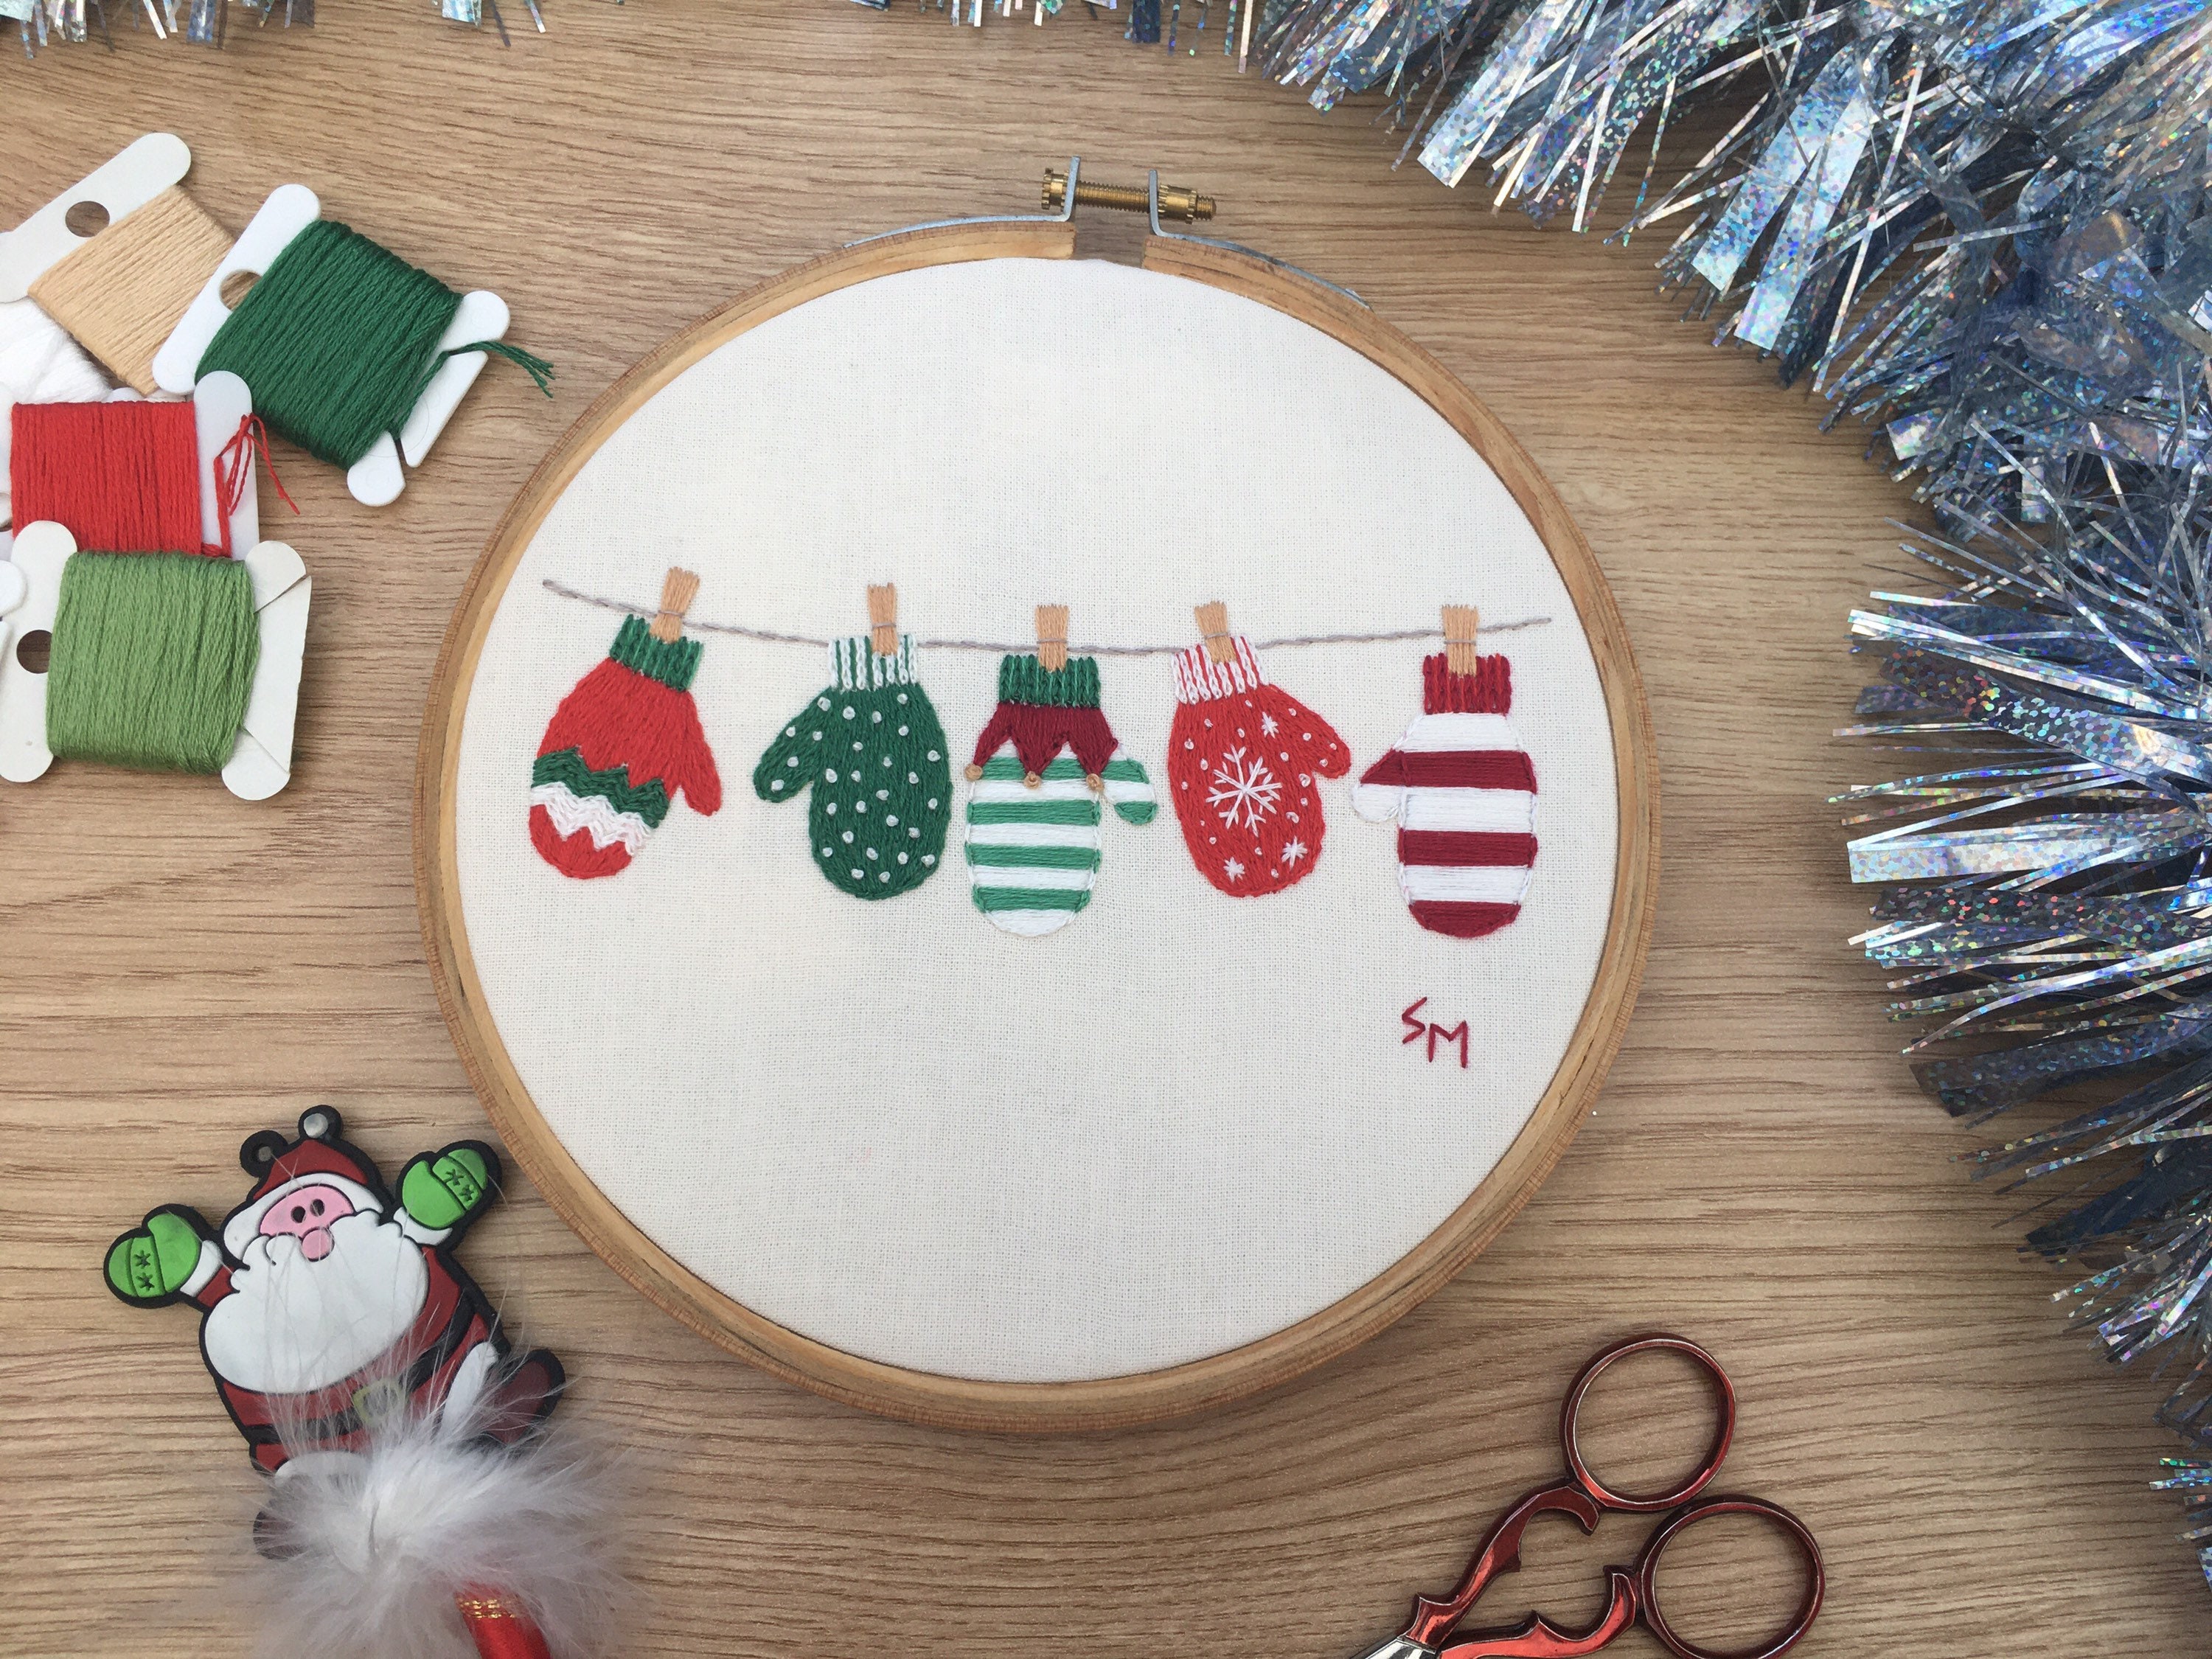 Mittens Ornament Kit, Christmas Embroidery Kit, DIY Christmas Ornament  Kits, Christmas Crafts for Adults to Make, 6 Piece Kit